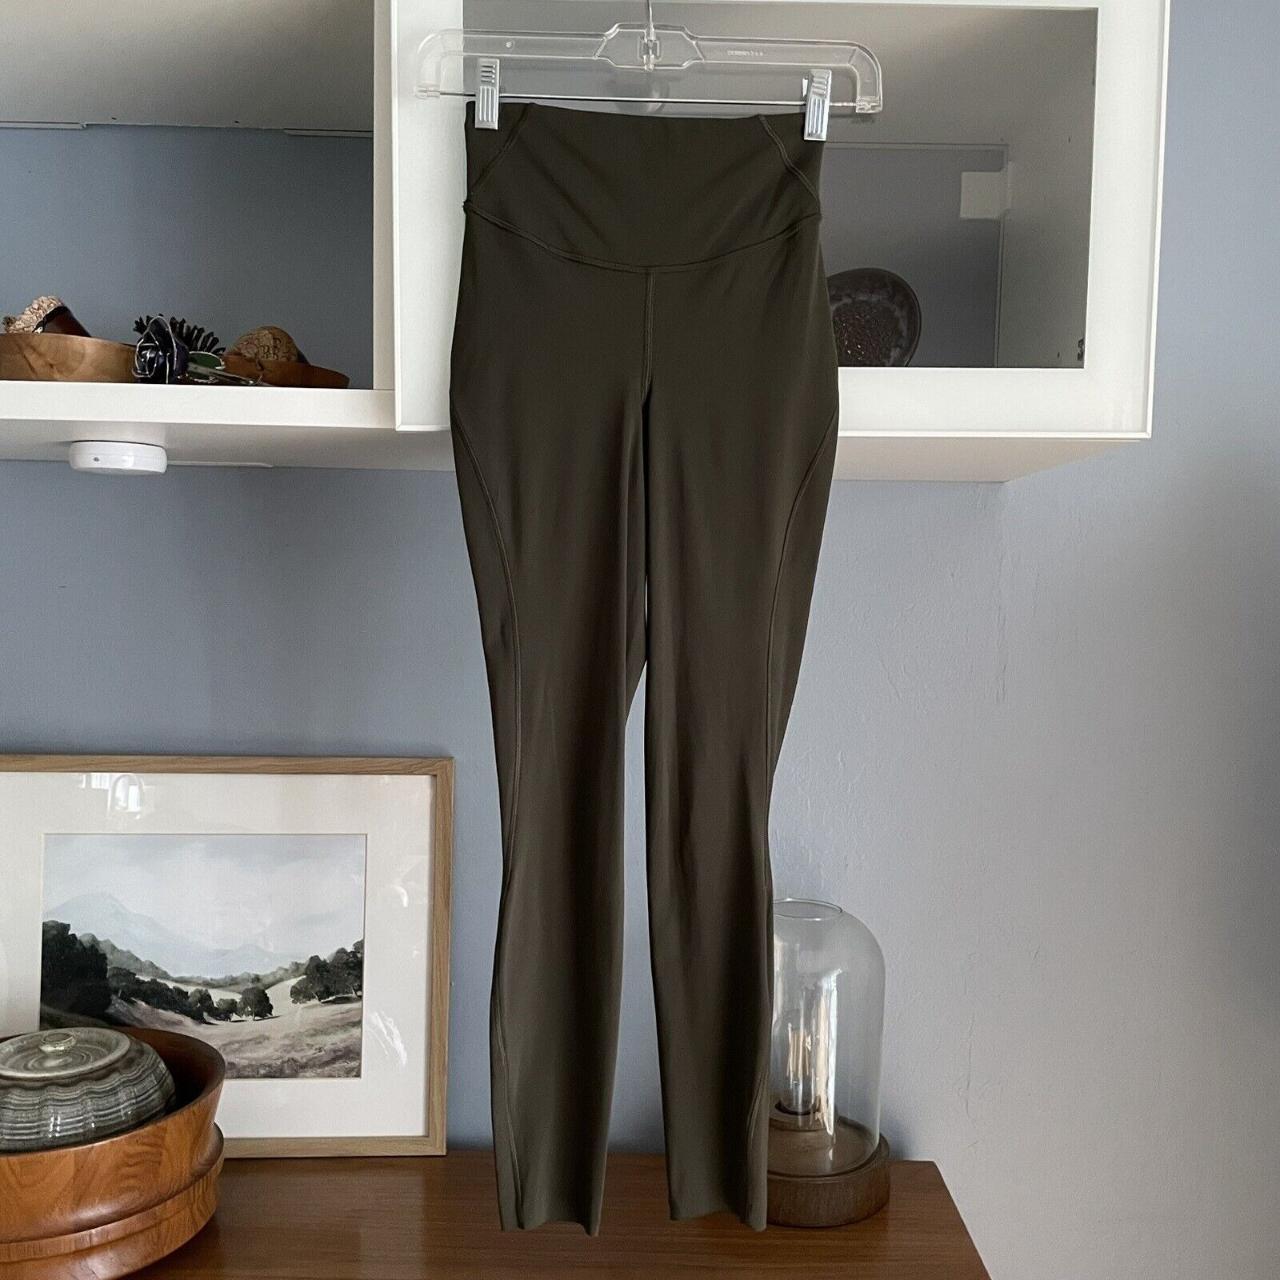 Lululemon Base Pace High Rise Tight 25 (Size 12), Women's Fashion,  Activewear on Carousell